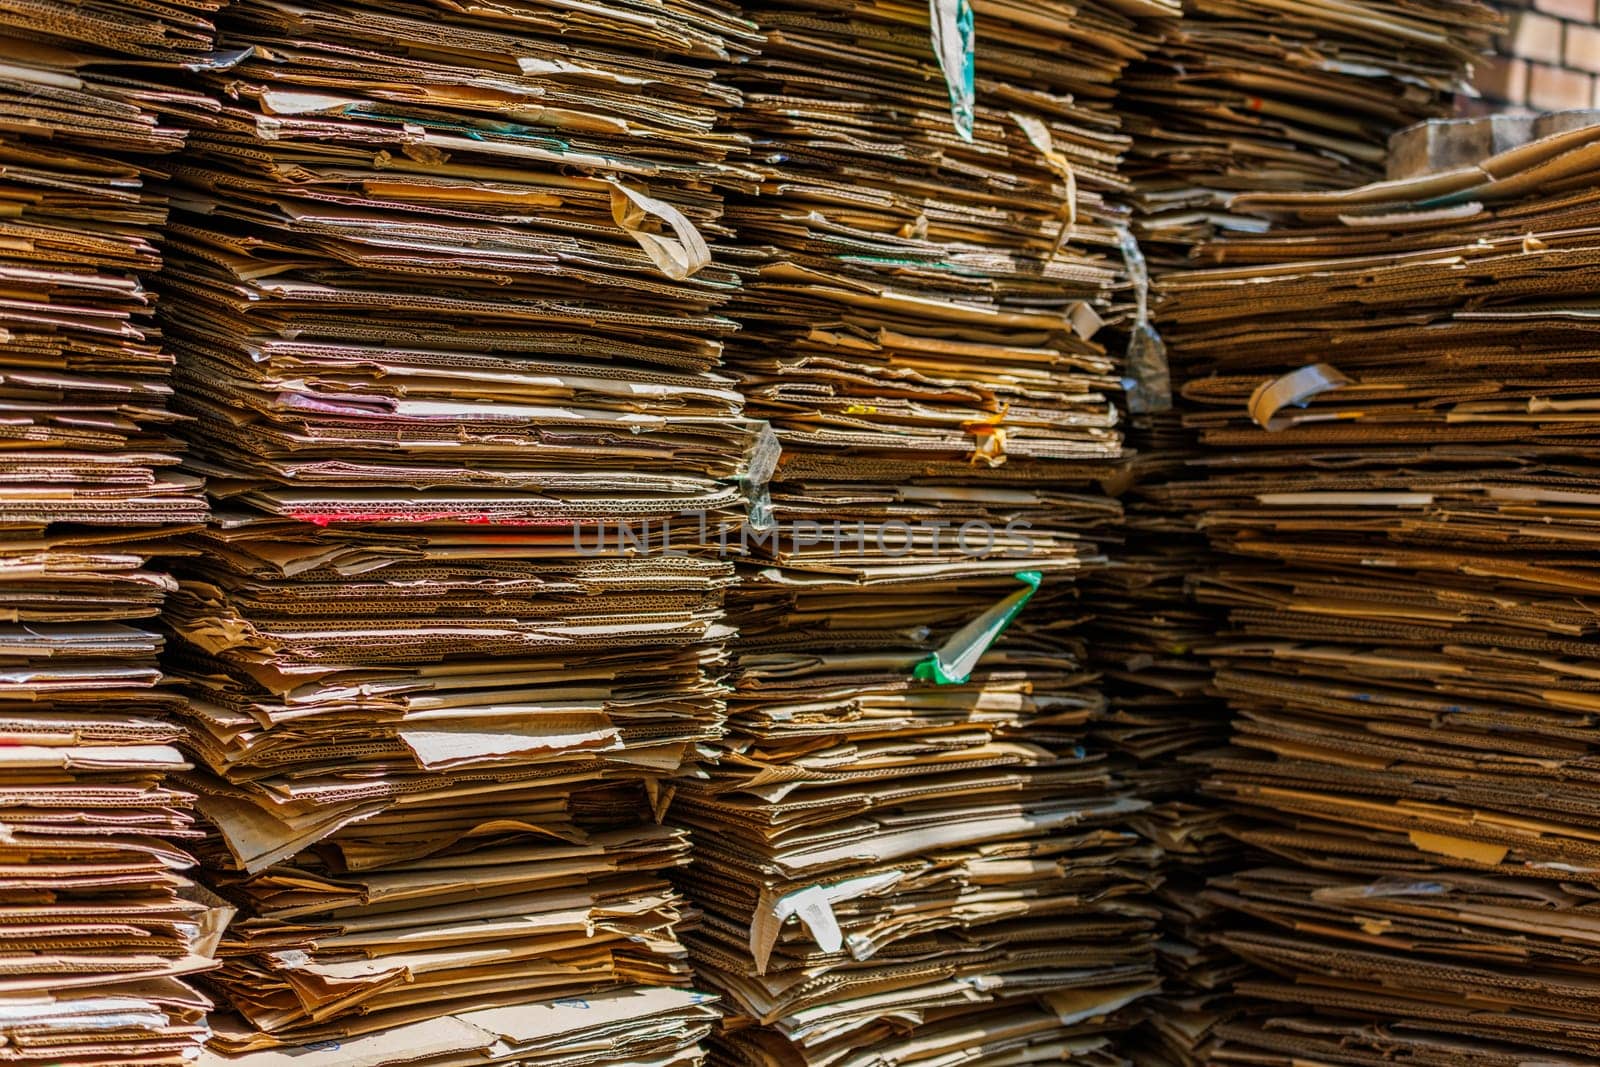 Stacks of crushed cardboard boxes, full-frame closeup background by z1b